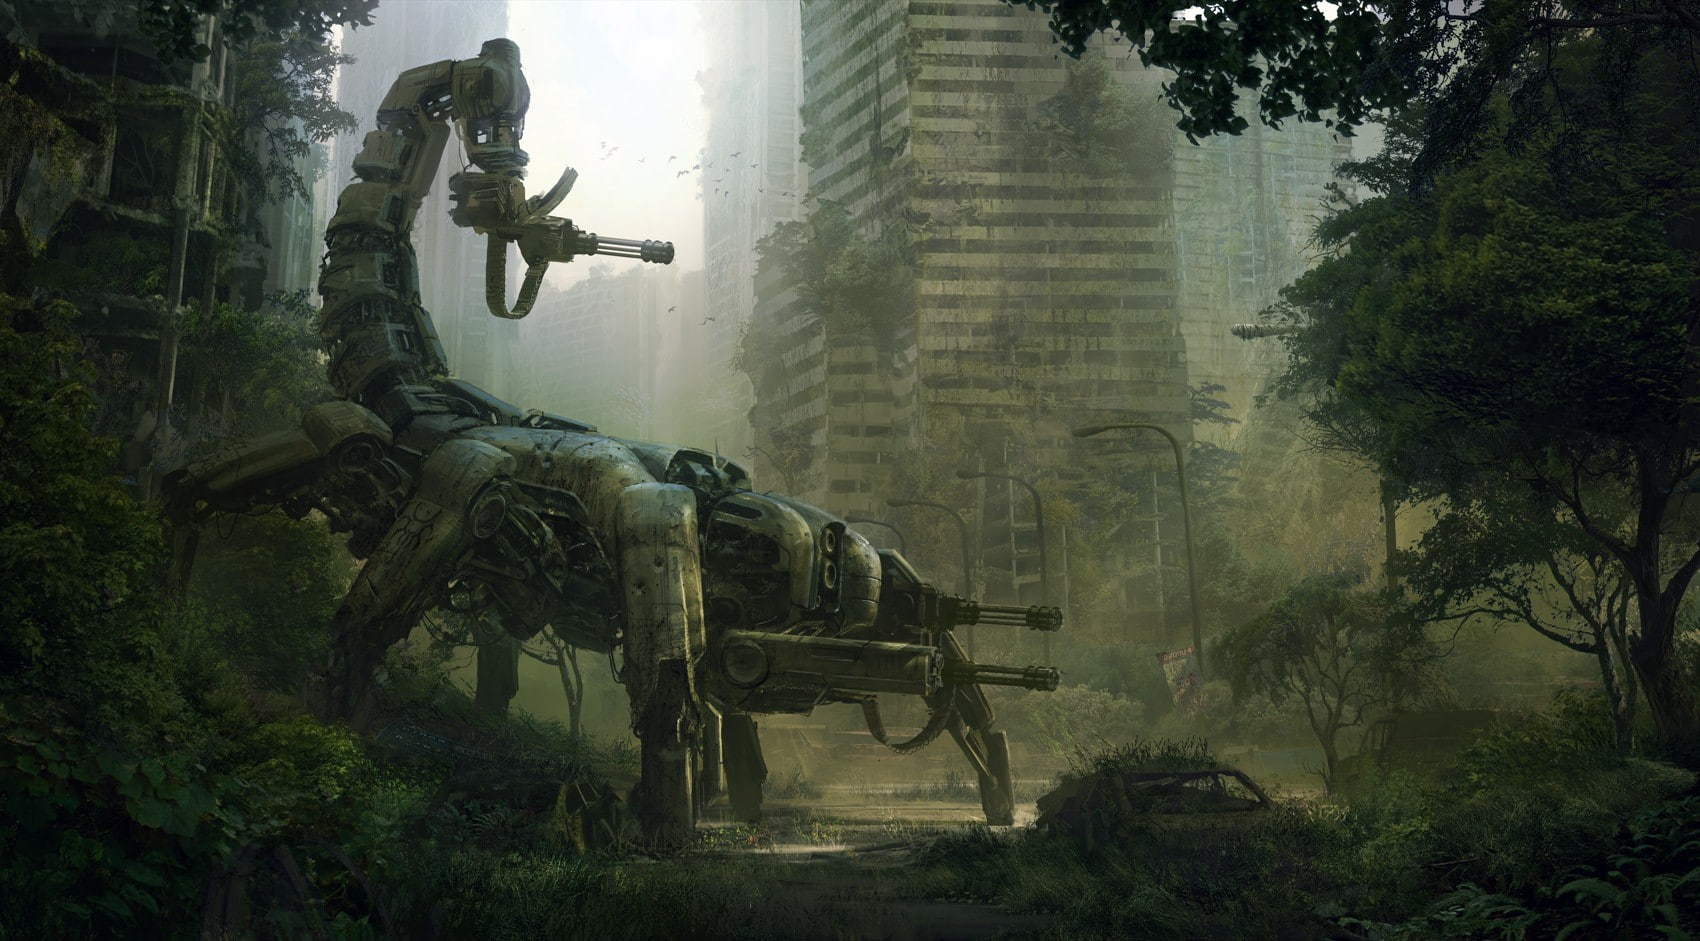 wasteland 2 scorpitron, military, armed forces, army, government